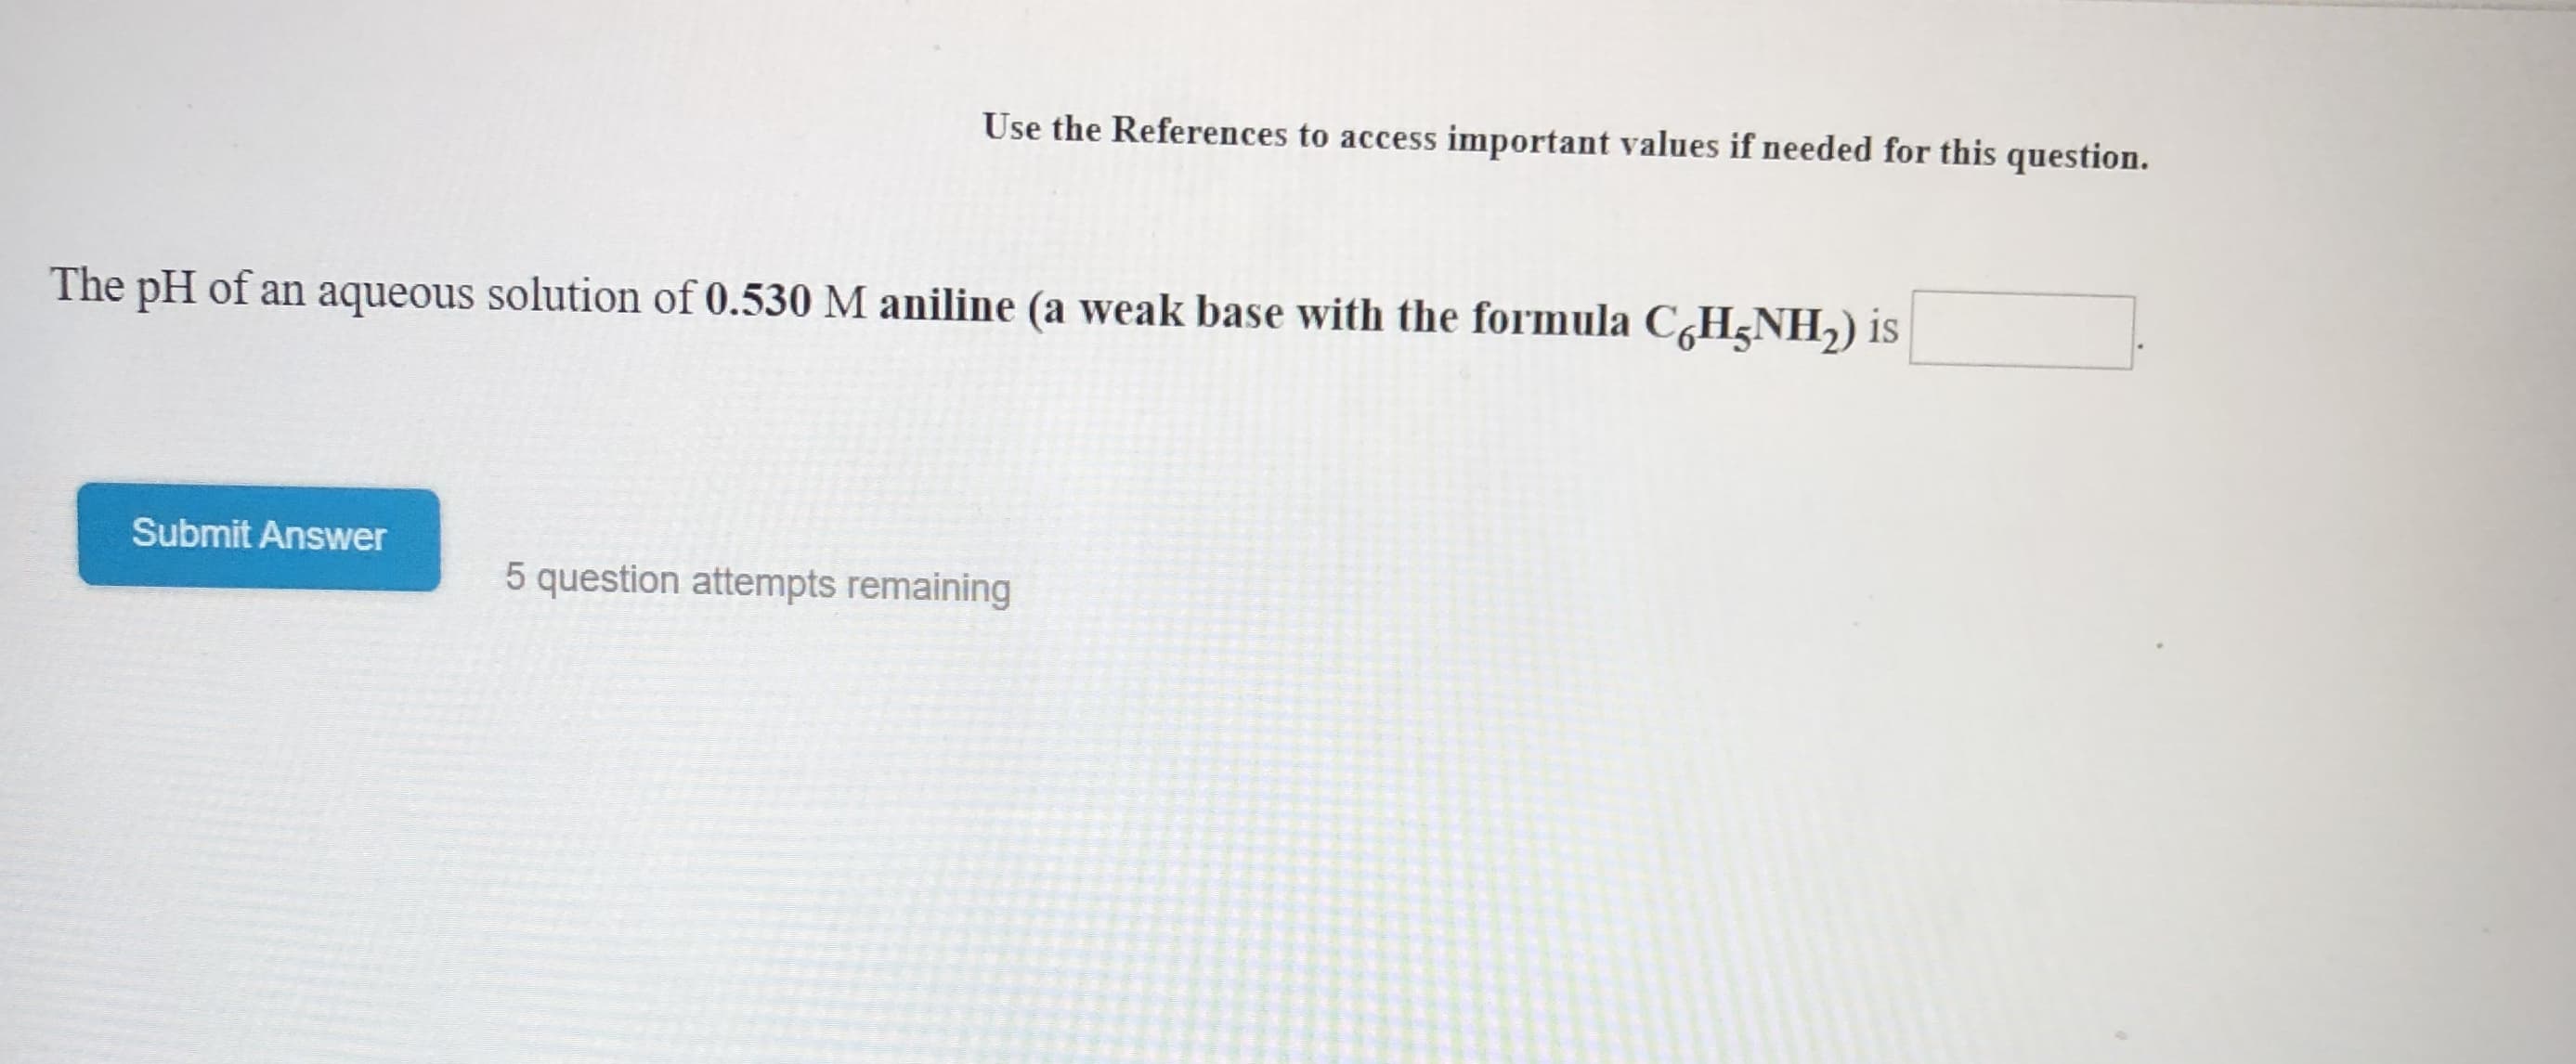 Use the References to access important values if needed for this question.
The pH of an aqueous solution of 0.530 M aniline (a weak base with the formula CHNH2) is
Submit Answer
5 question attempts remaining
